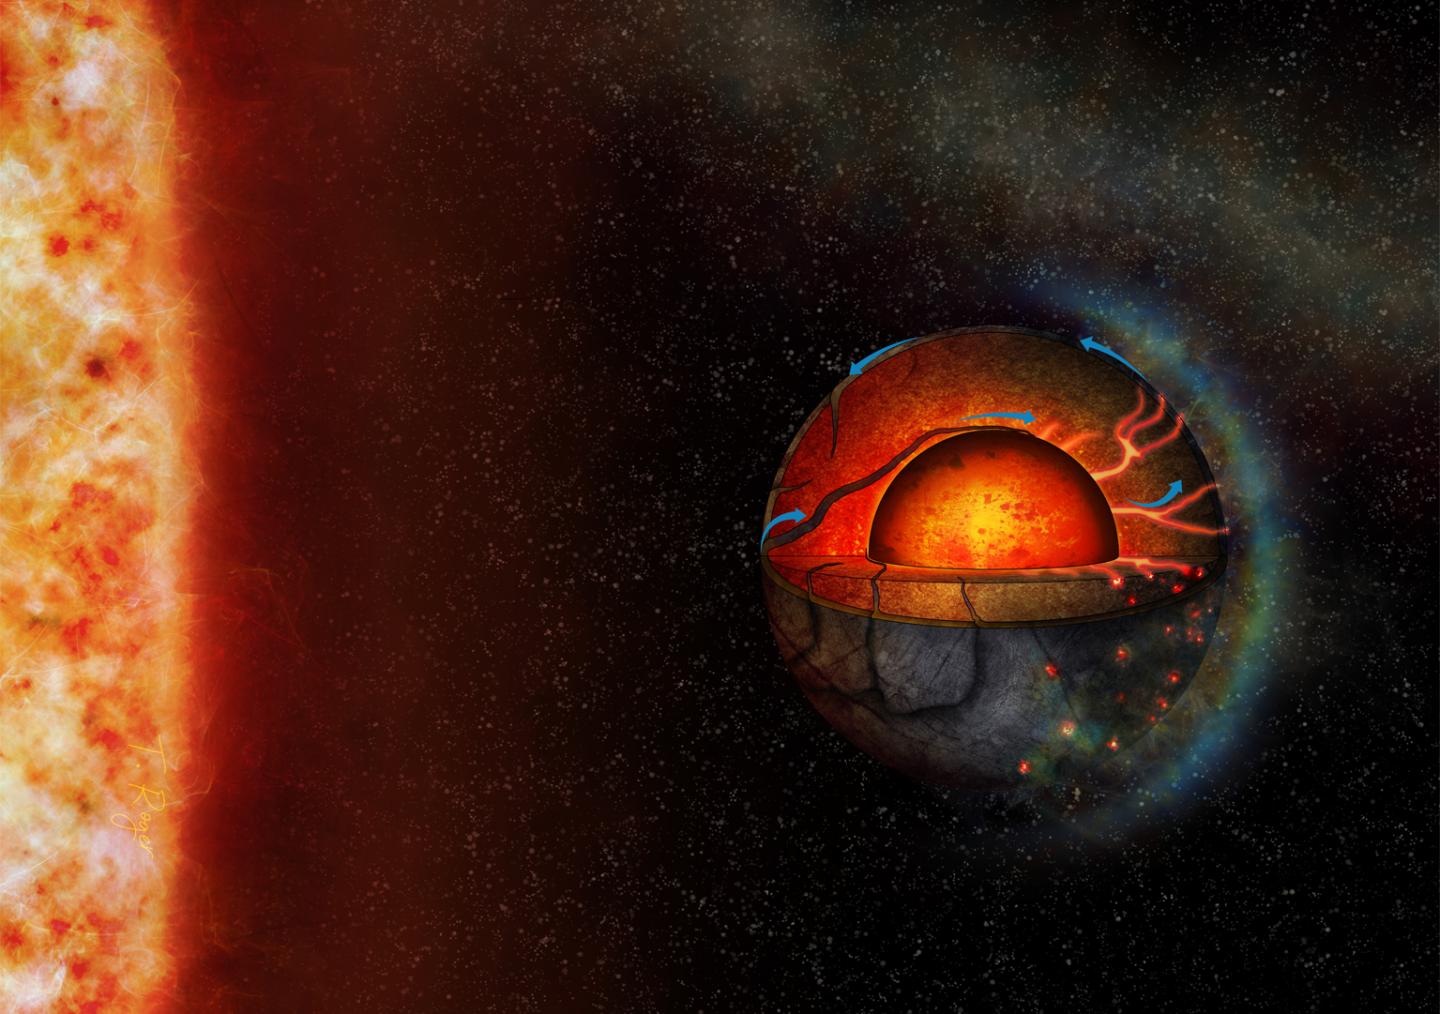 This artist's illustration represents the possible interior dynamics of the super-Earth exoplanet LHS 3844b.